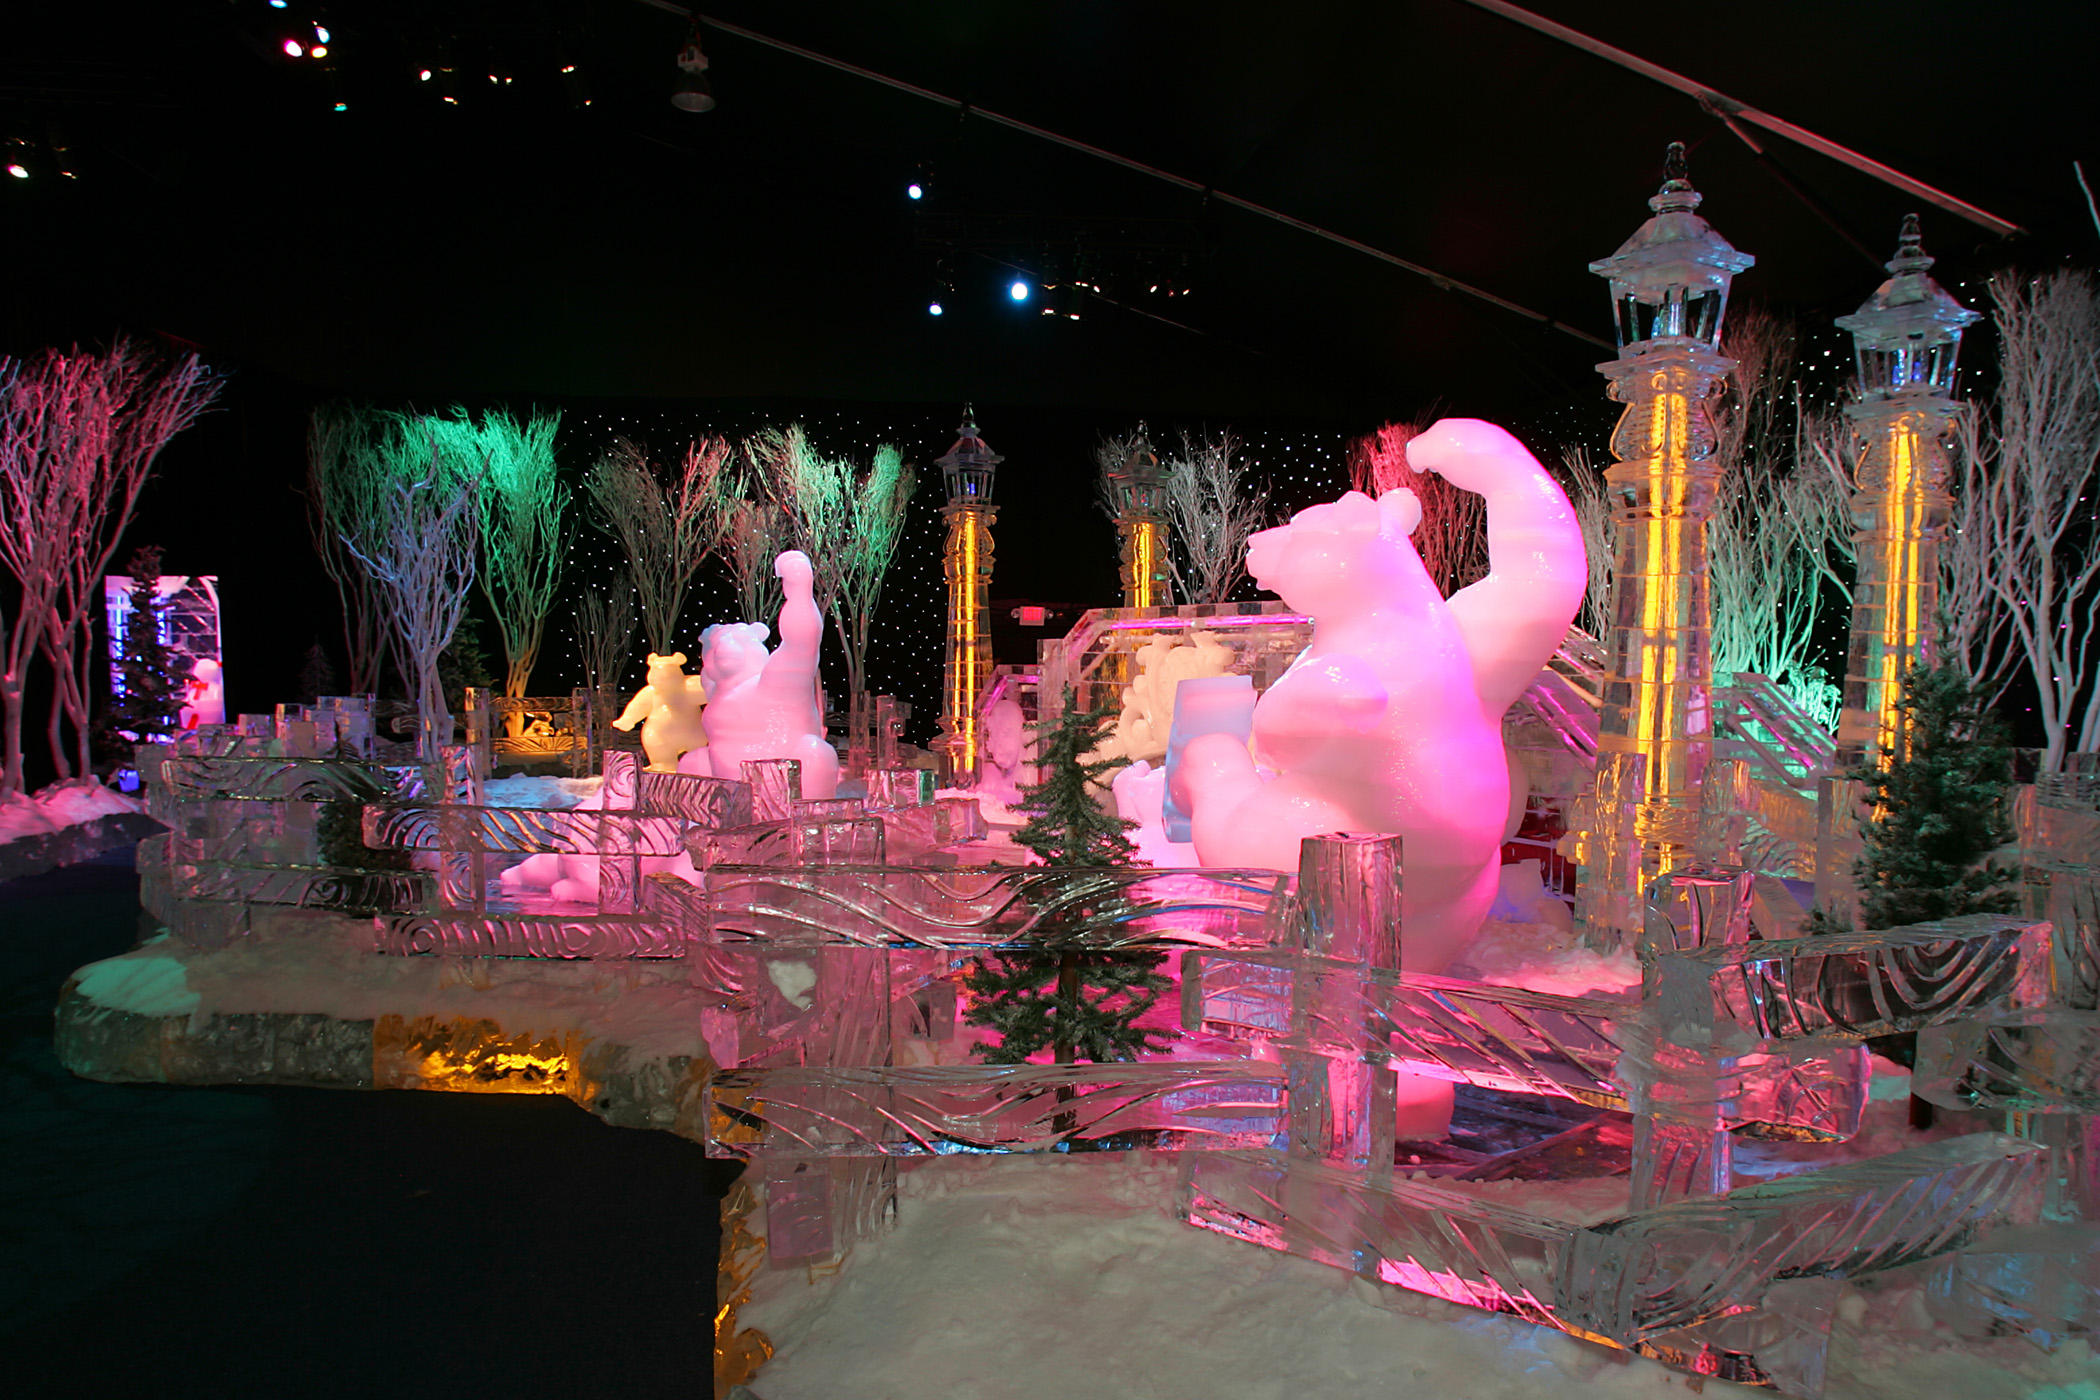 Gaylord Texan Resort Carves a Magical Winter Wonderland in ICE